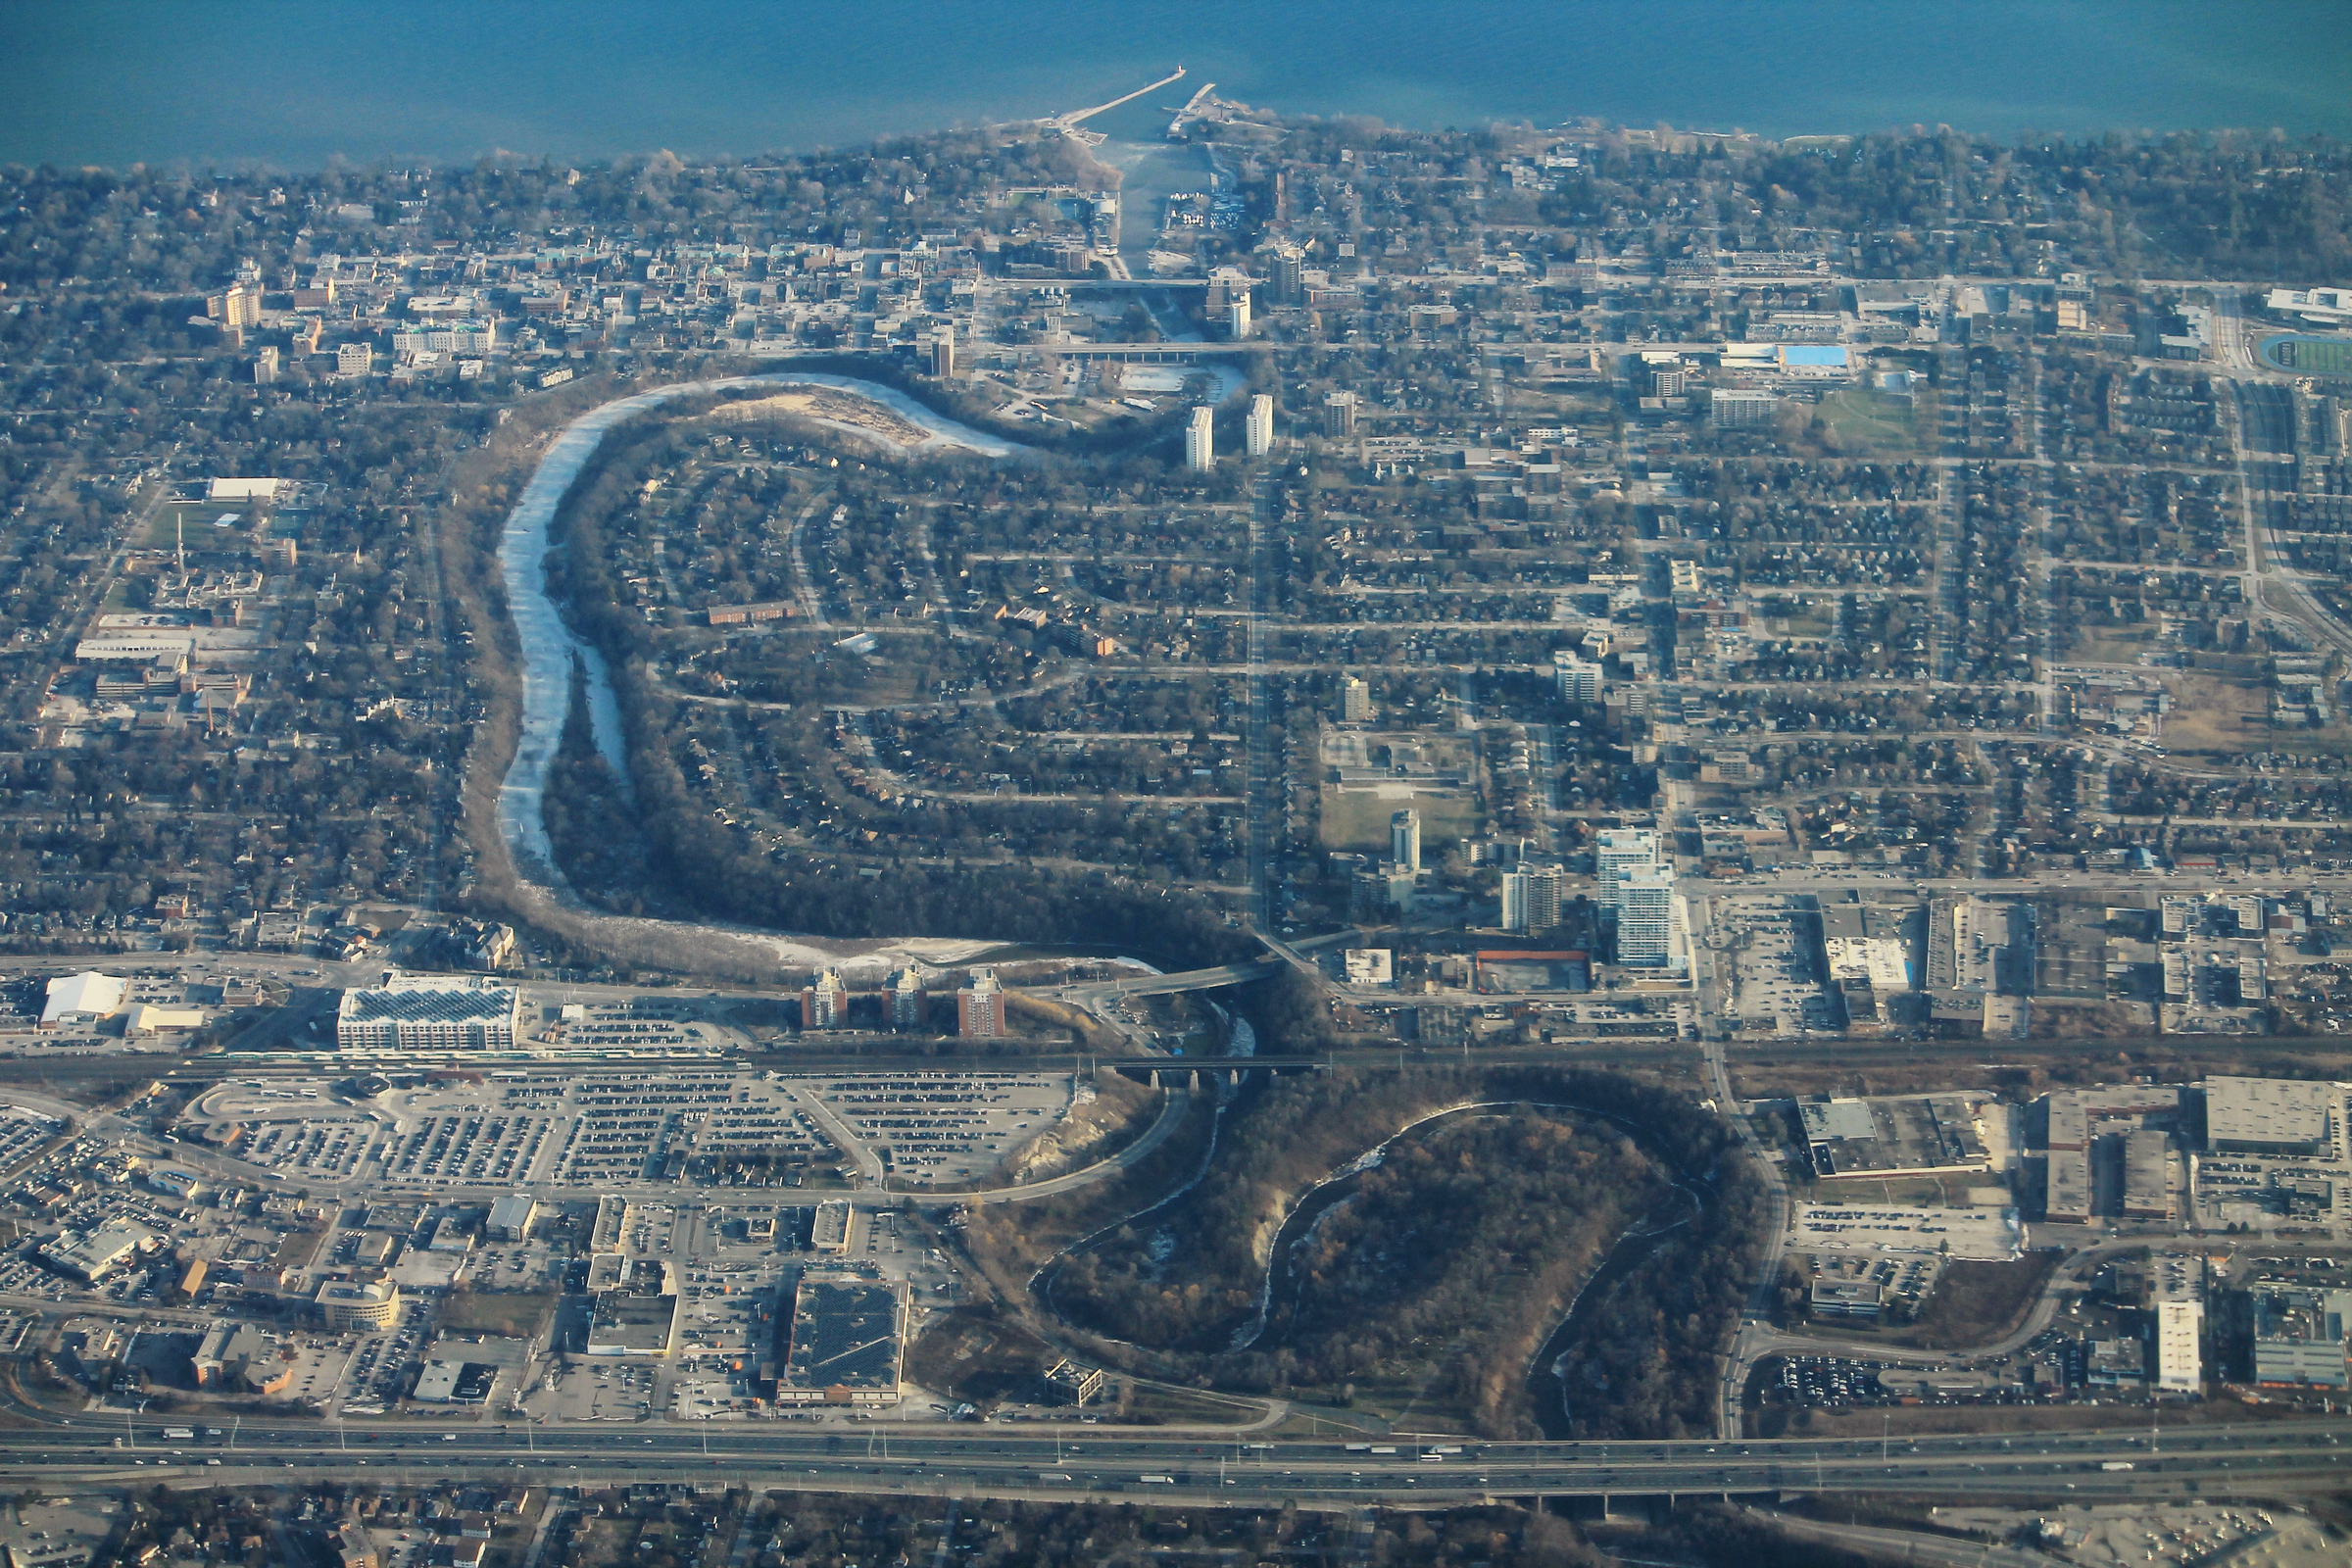 Oakville is seen from above, with a creek winding through dense suburbs into Lake Ontario.